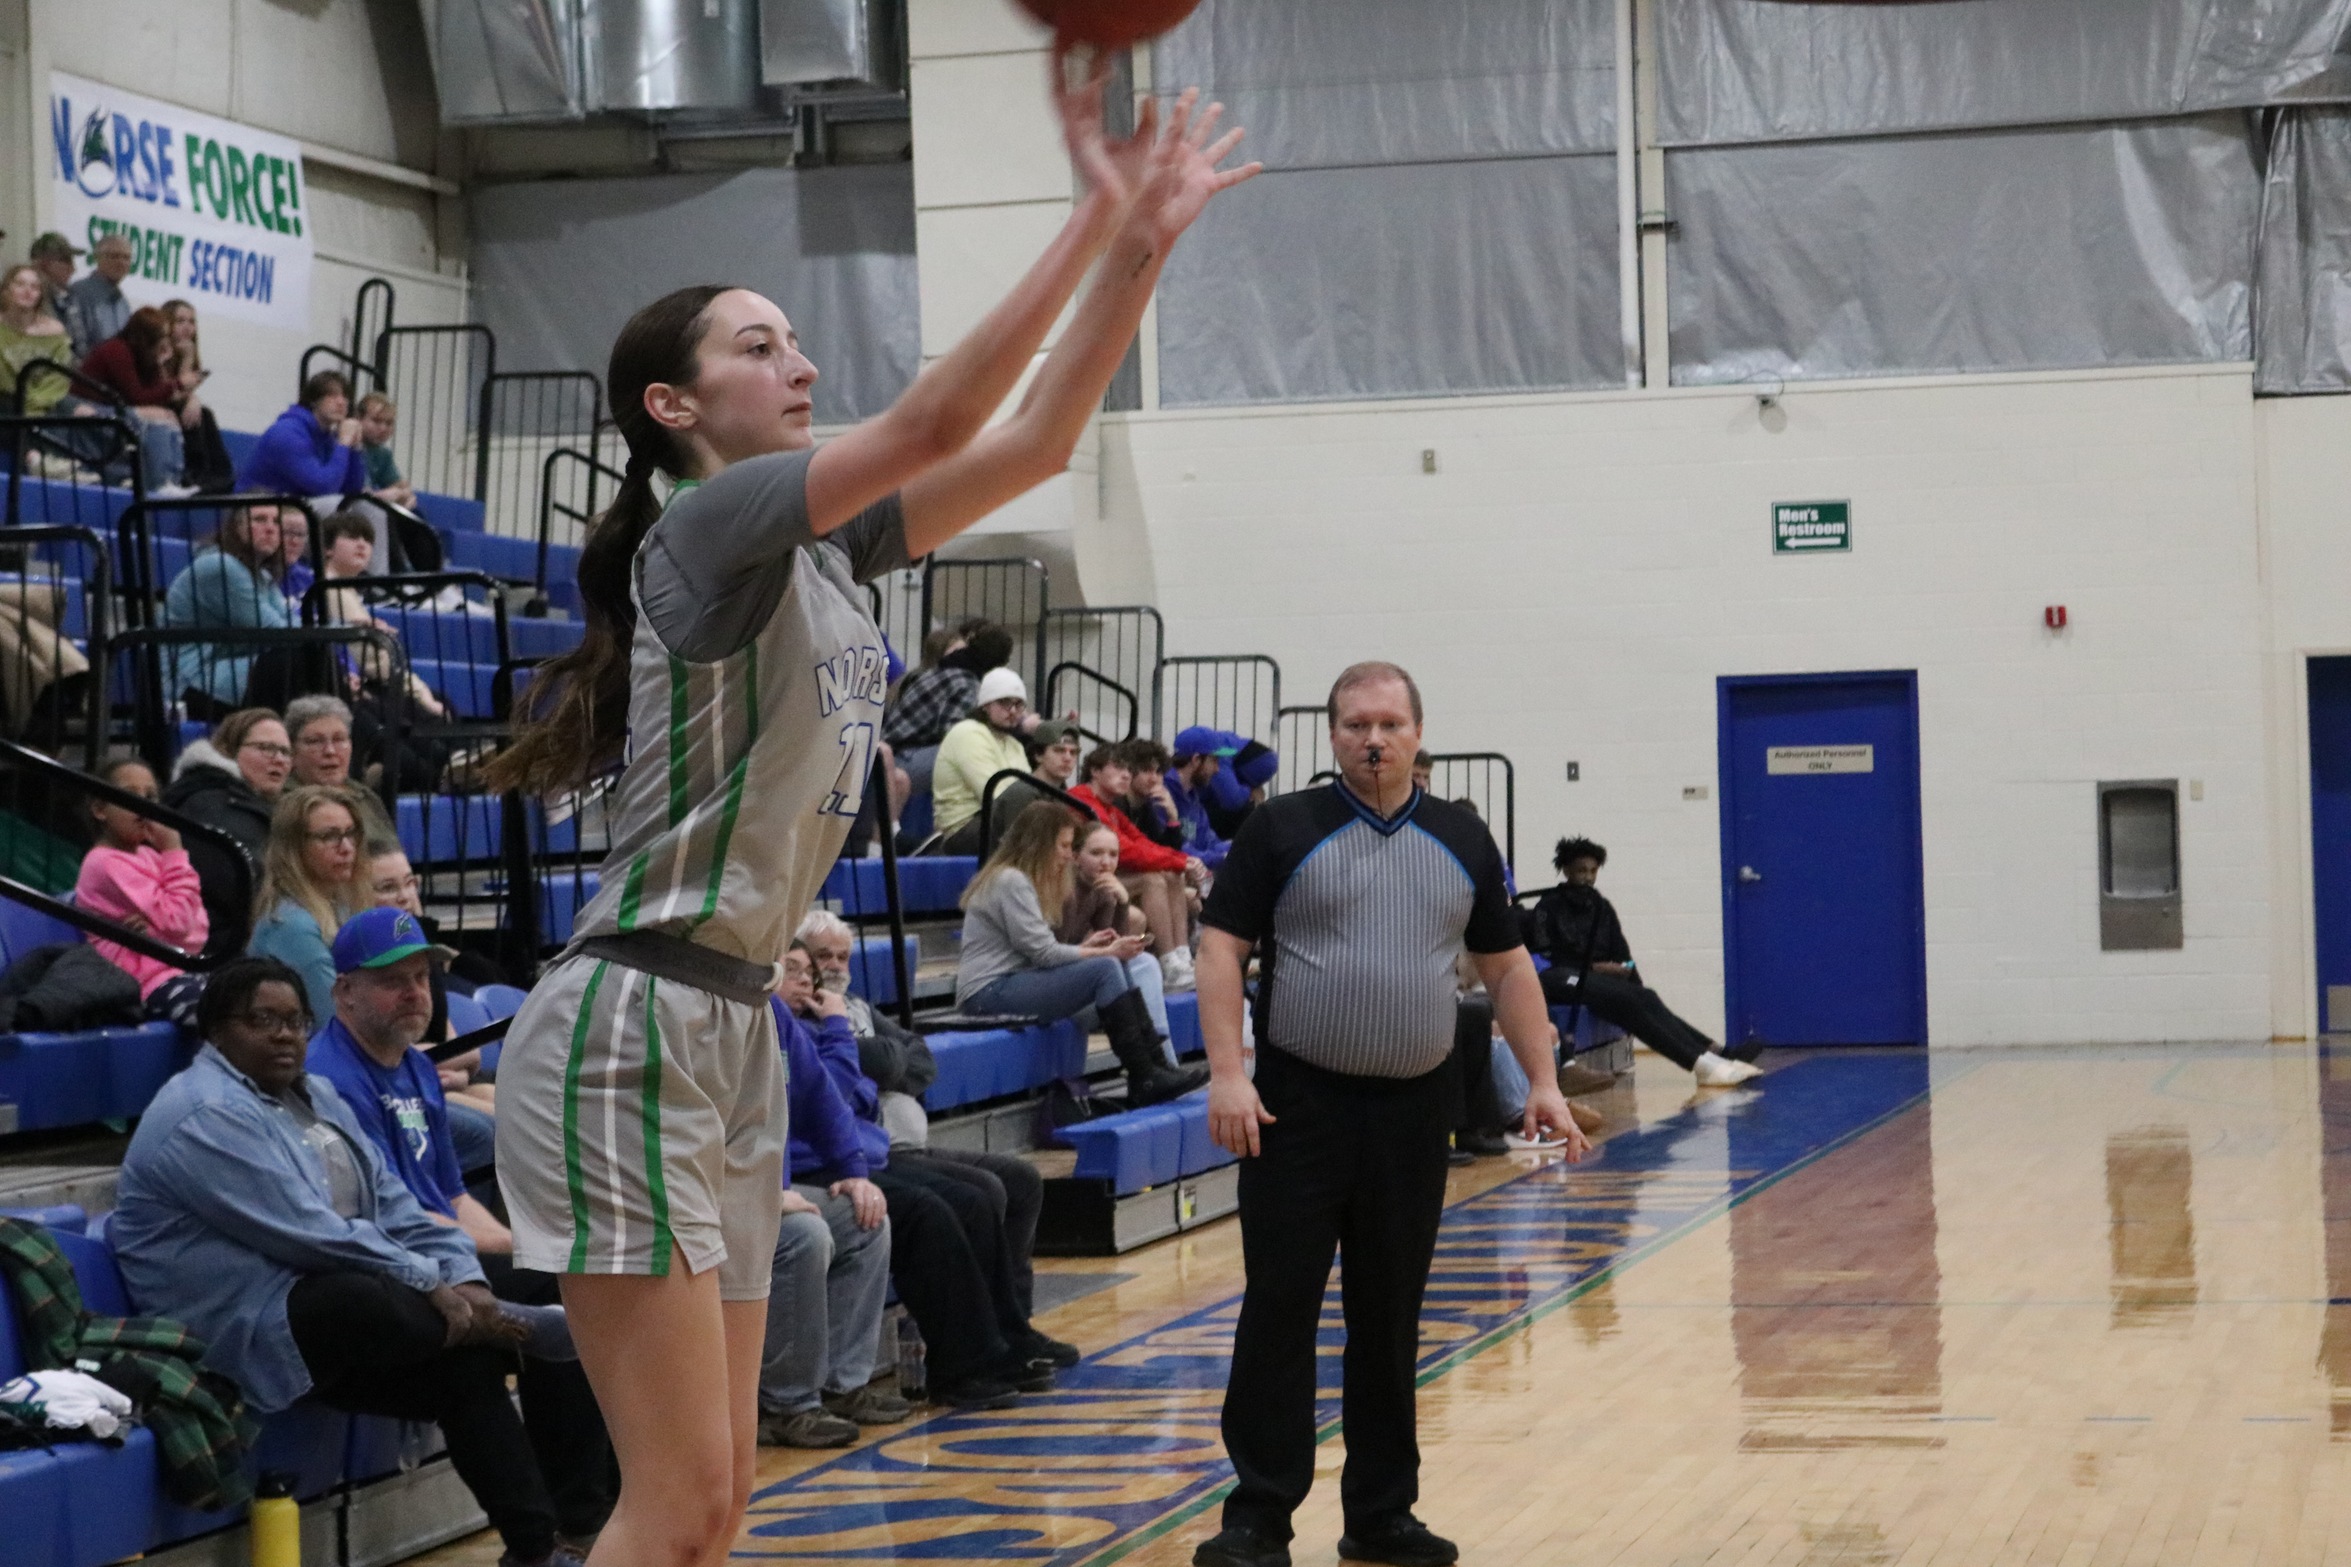 Kennedy Sproule releasing a three-point attempt